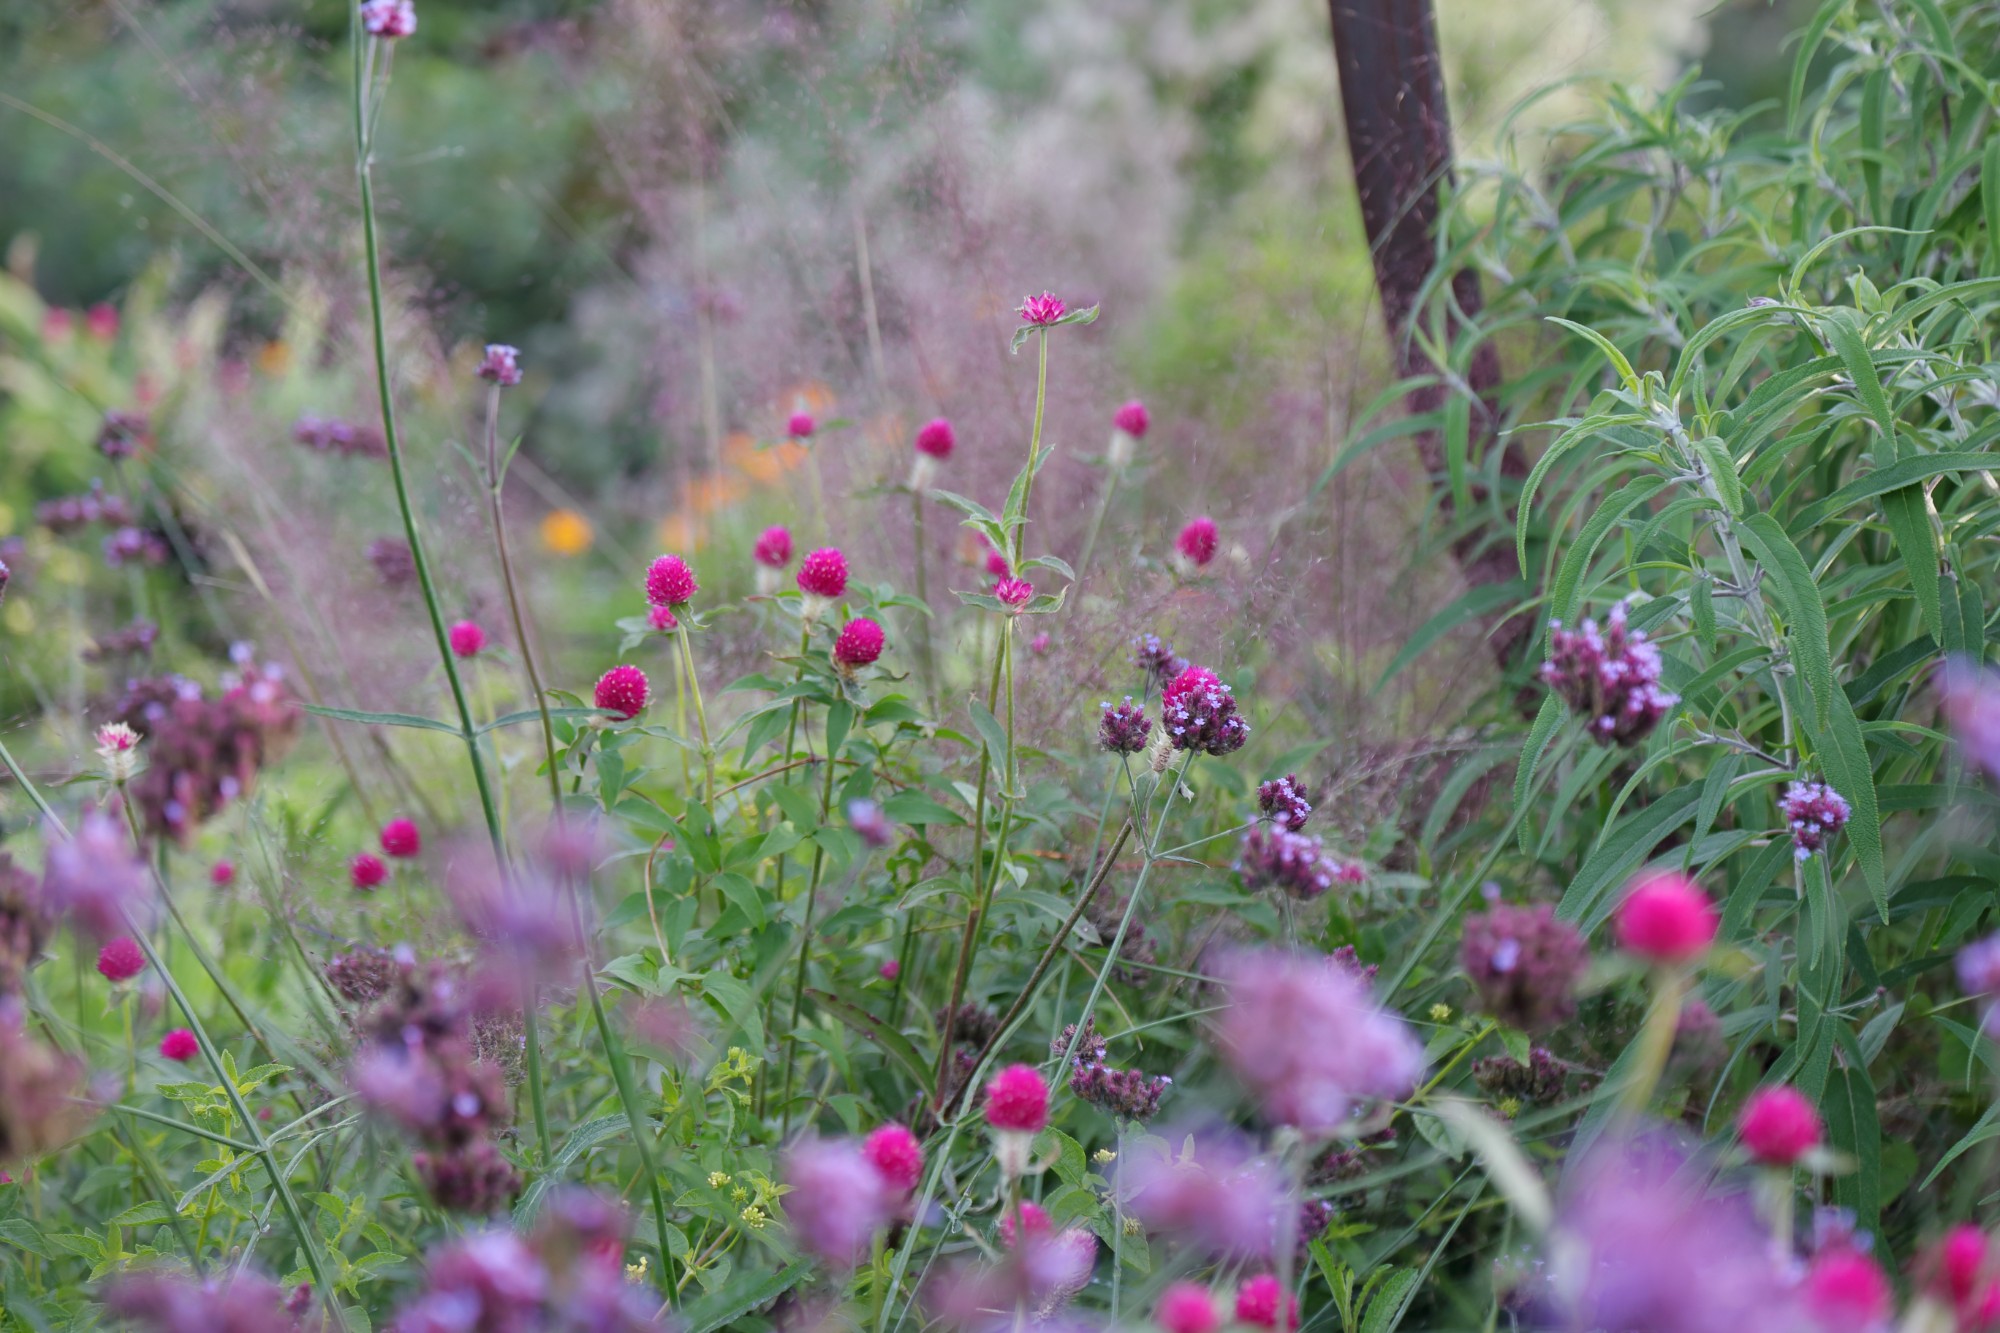 Gomphrena 'Forest Pink' (Forest Pink globe amaranth) in the Wells Fargo Rose Garden on October 26. Photo by Kelly Norris.